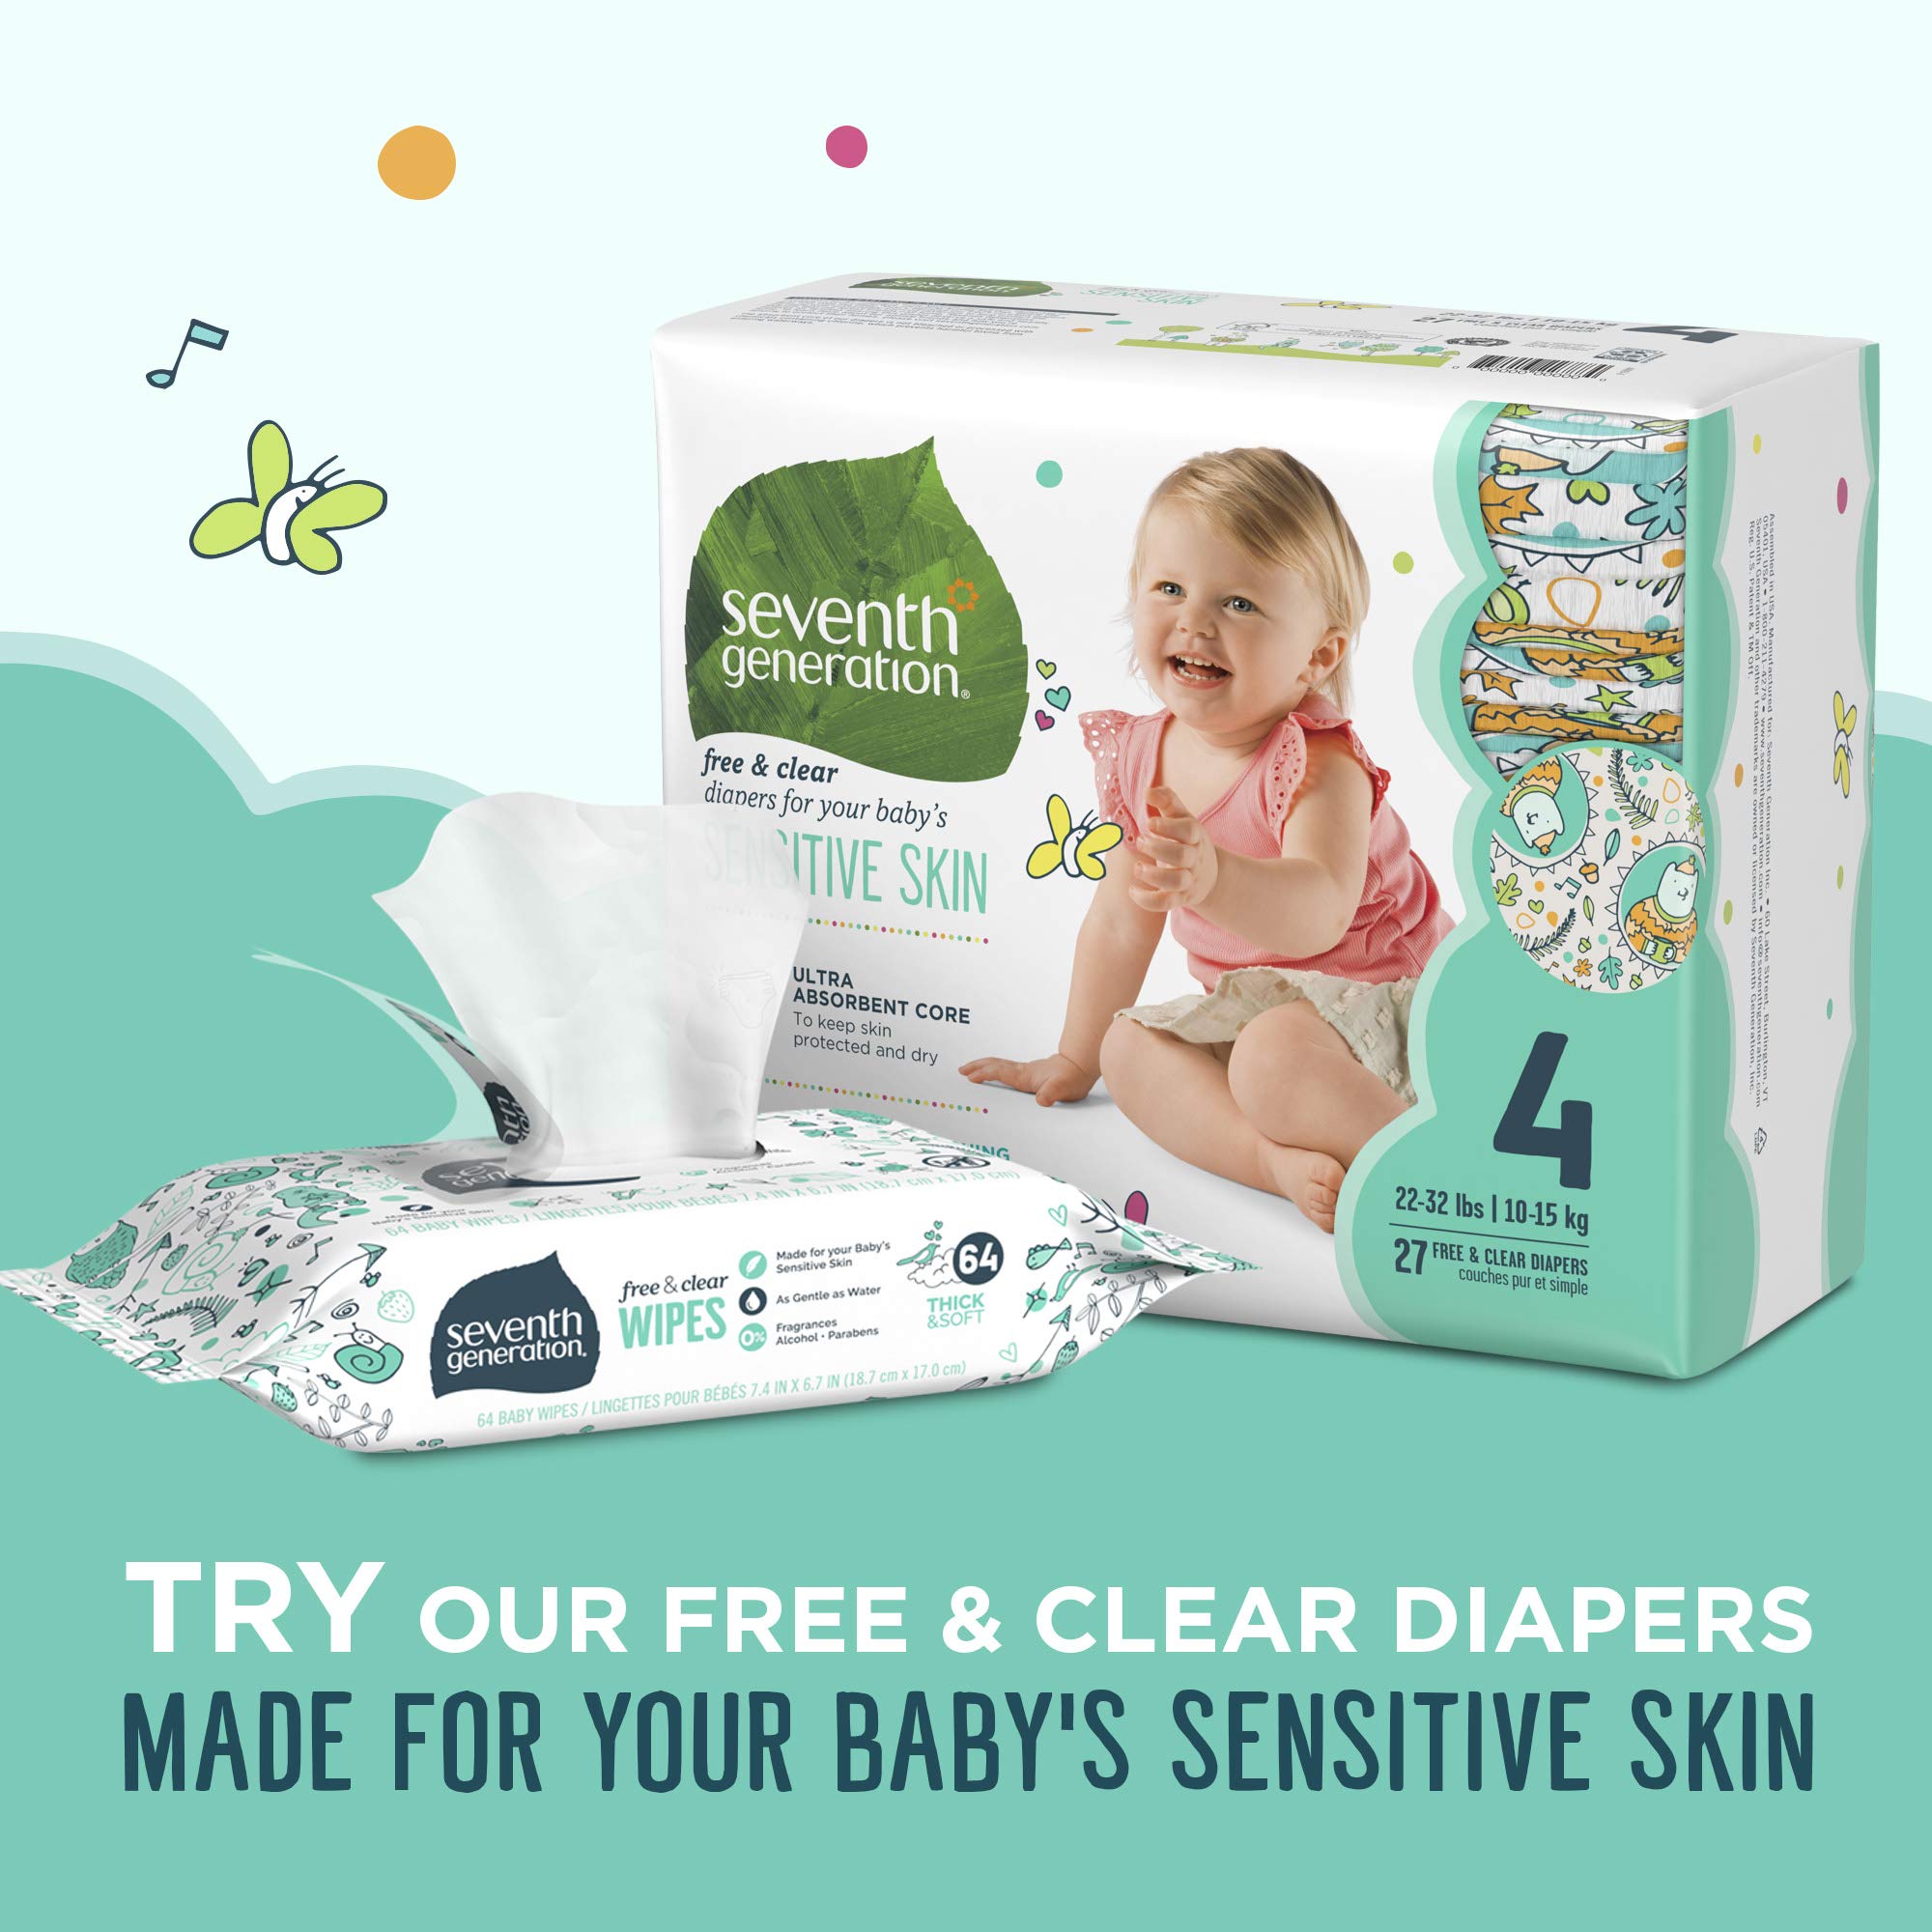 Seventh Generation Free & Clear Baby Wipes Refill Unscented and Sensitive Gentle as Water 64 count Pack of 12 (768 Total)